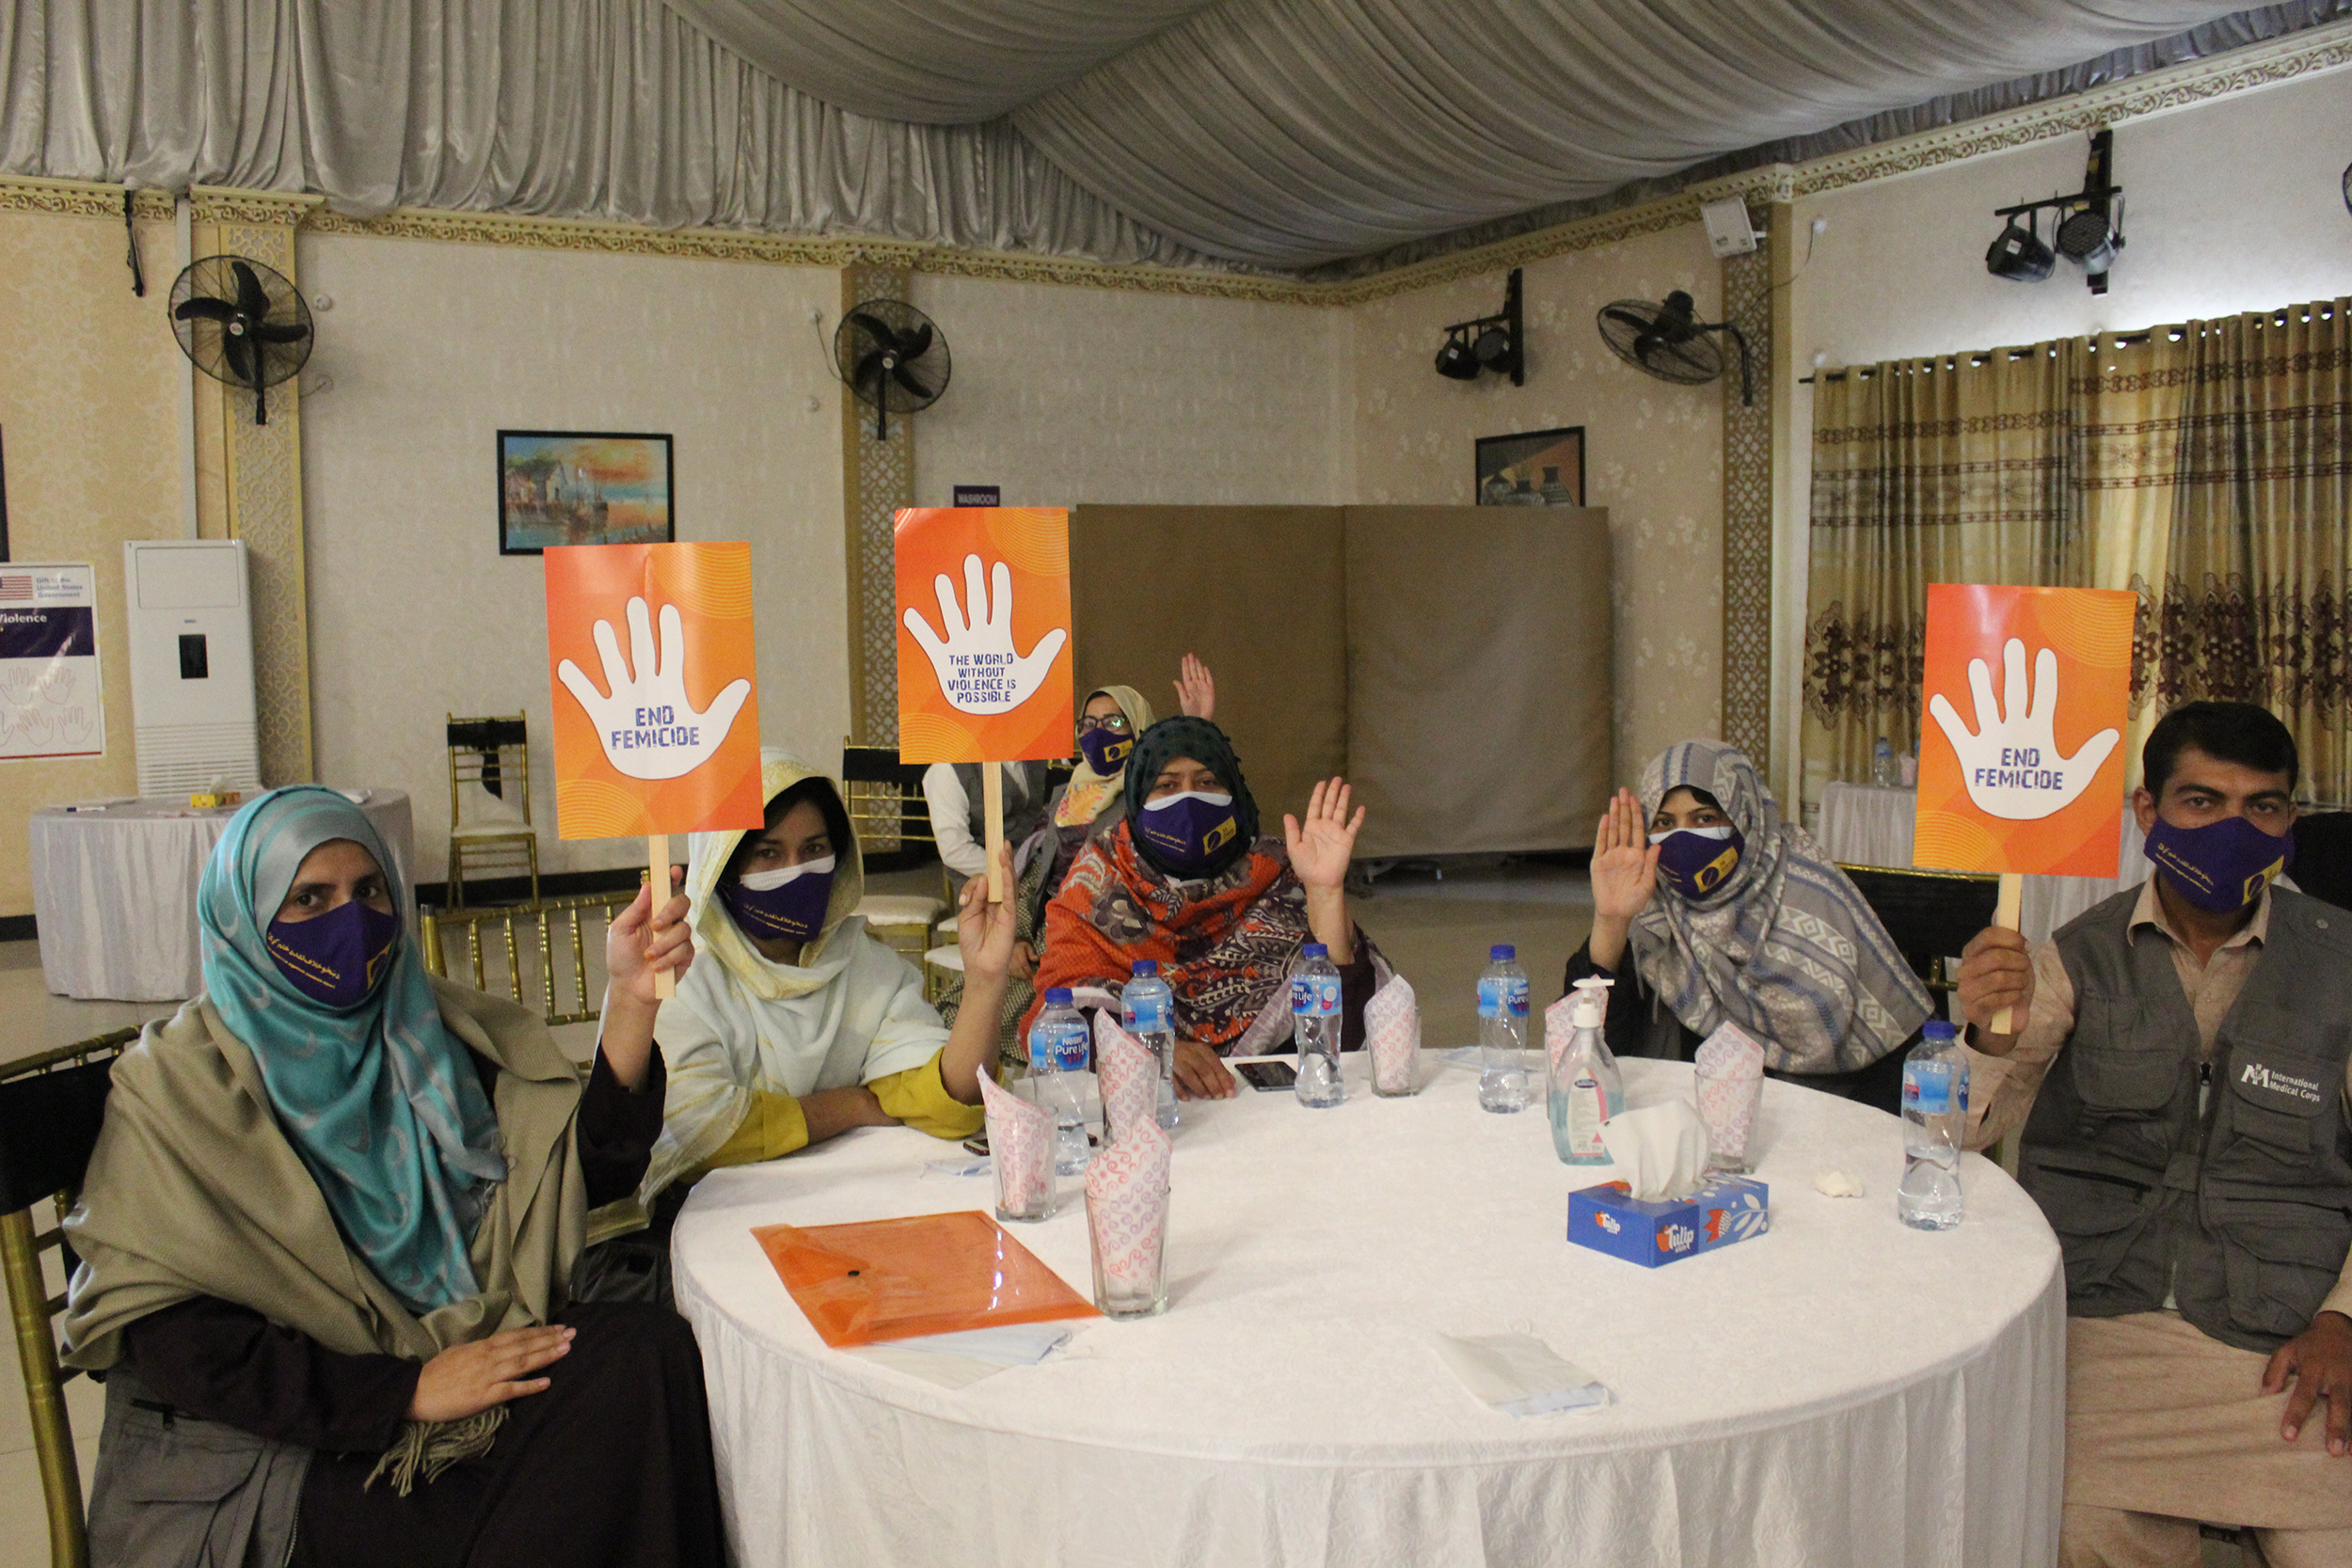 In Haripur, our team hosted a one-day meeting with key stakeholders to discuss the persistent challenges of gender-based violence